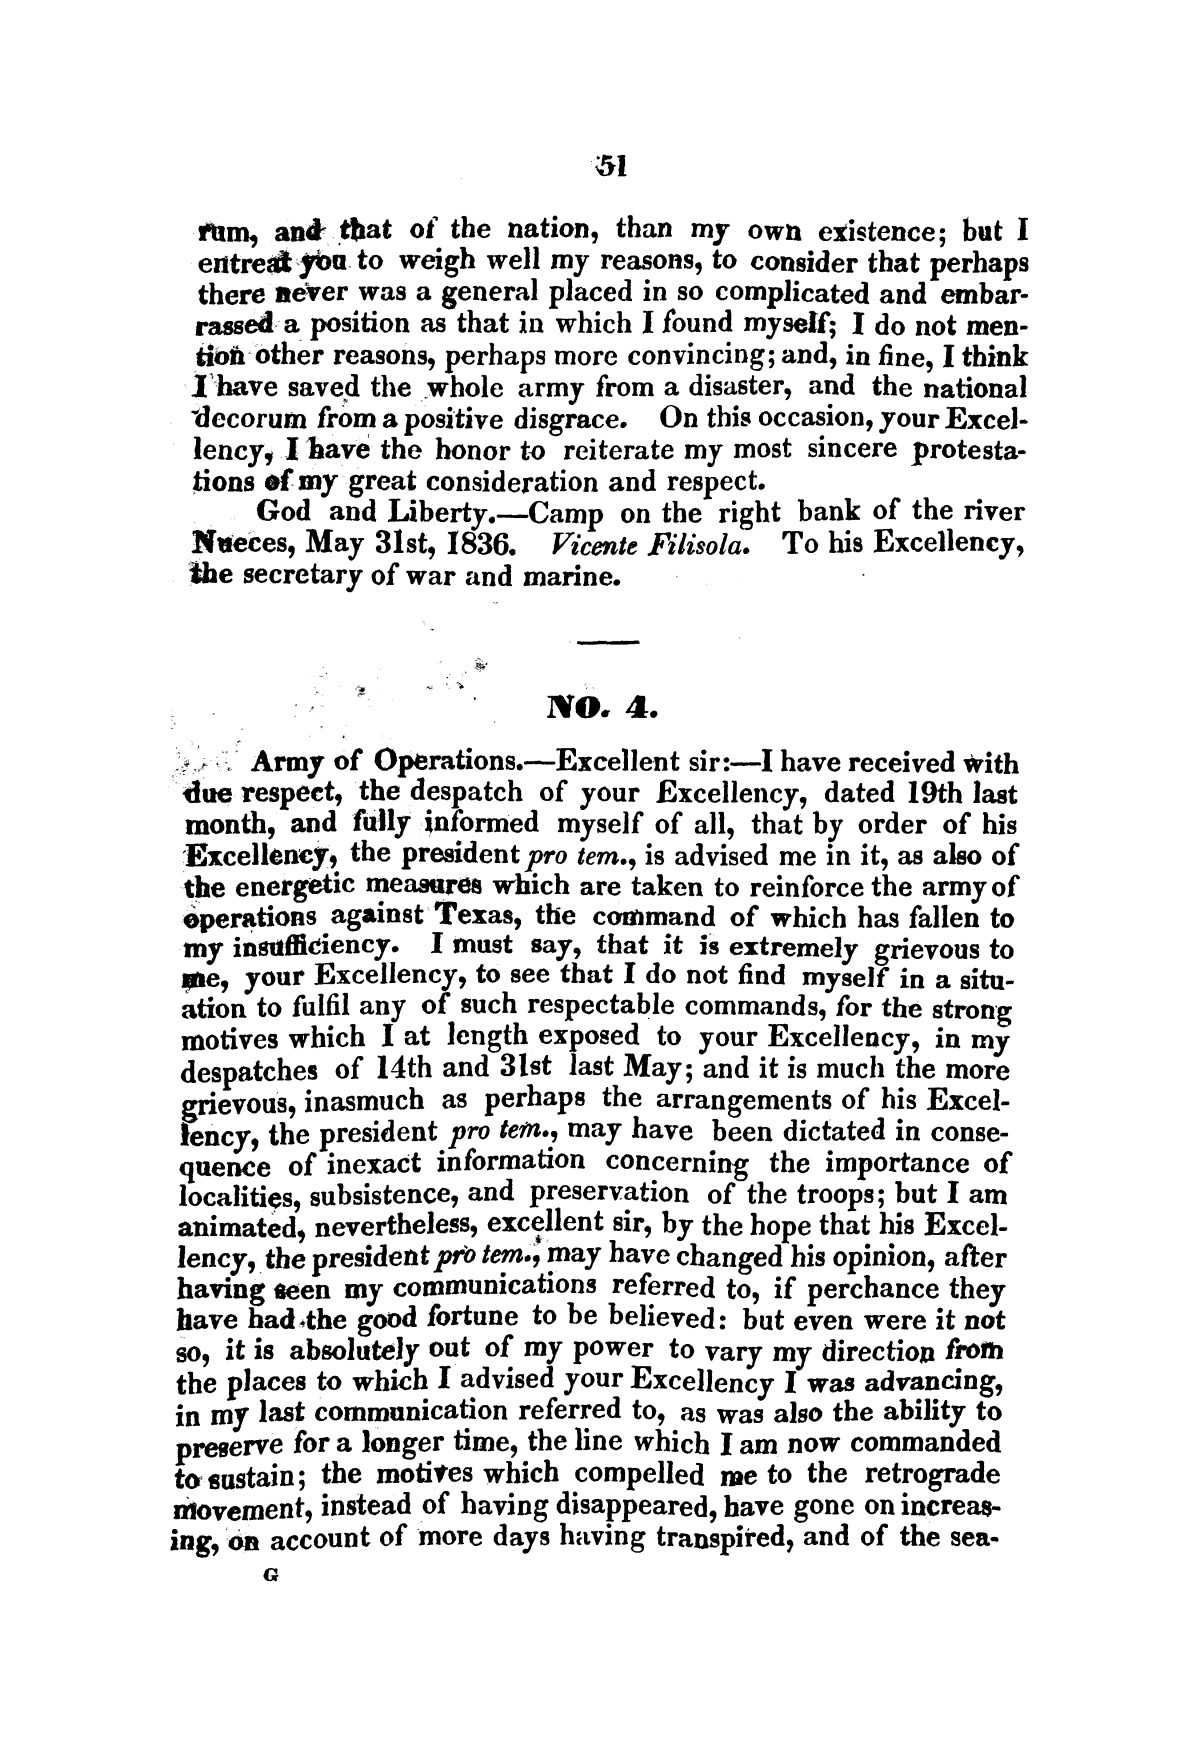 Evacuation of Texas : translation of the Representation addressed to the supreme government / by Vicente Filisola, in defence of his honor, and explanation of his operations as commander-in-chief of the army against Texas.
                                                
                                                    [Sequence #]: 54 of 72
                                                